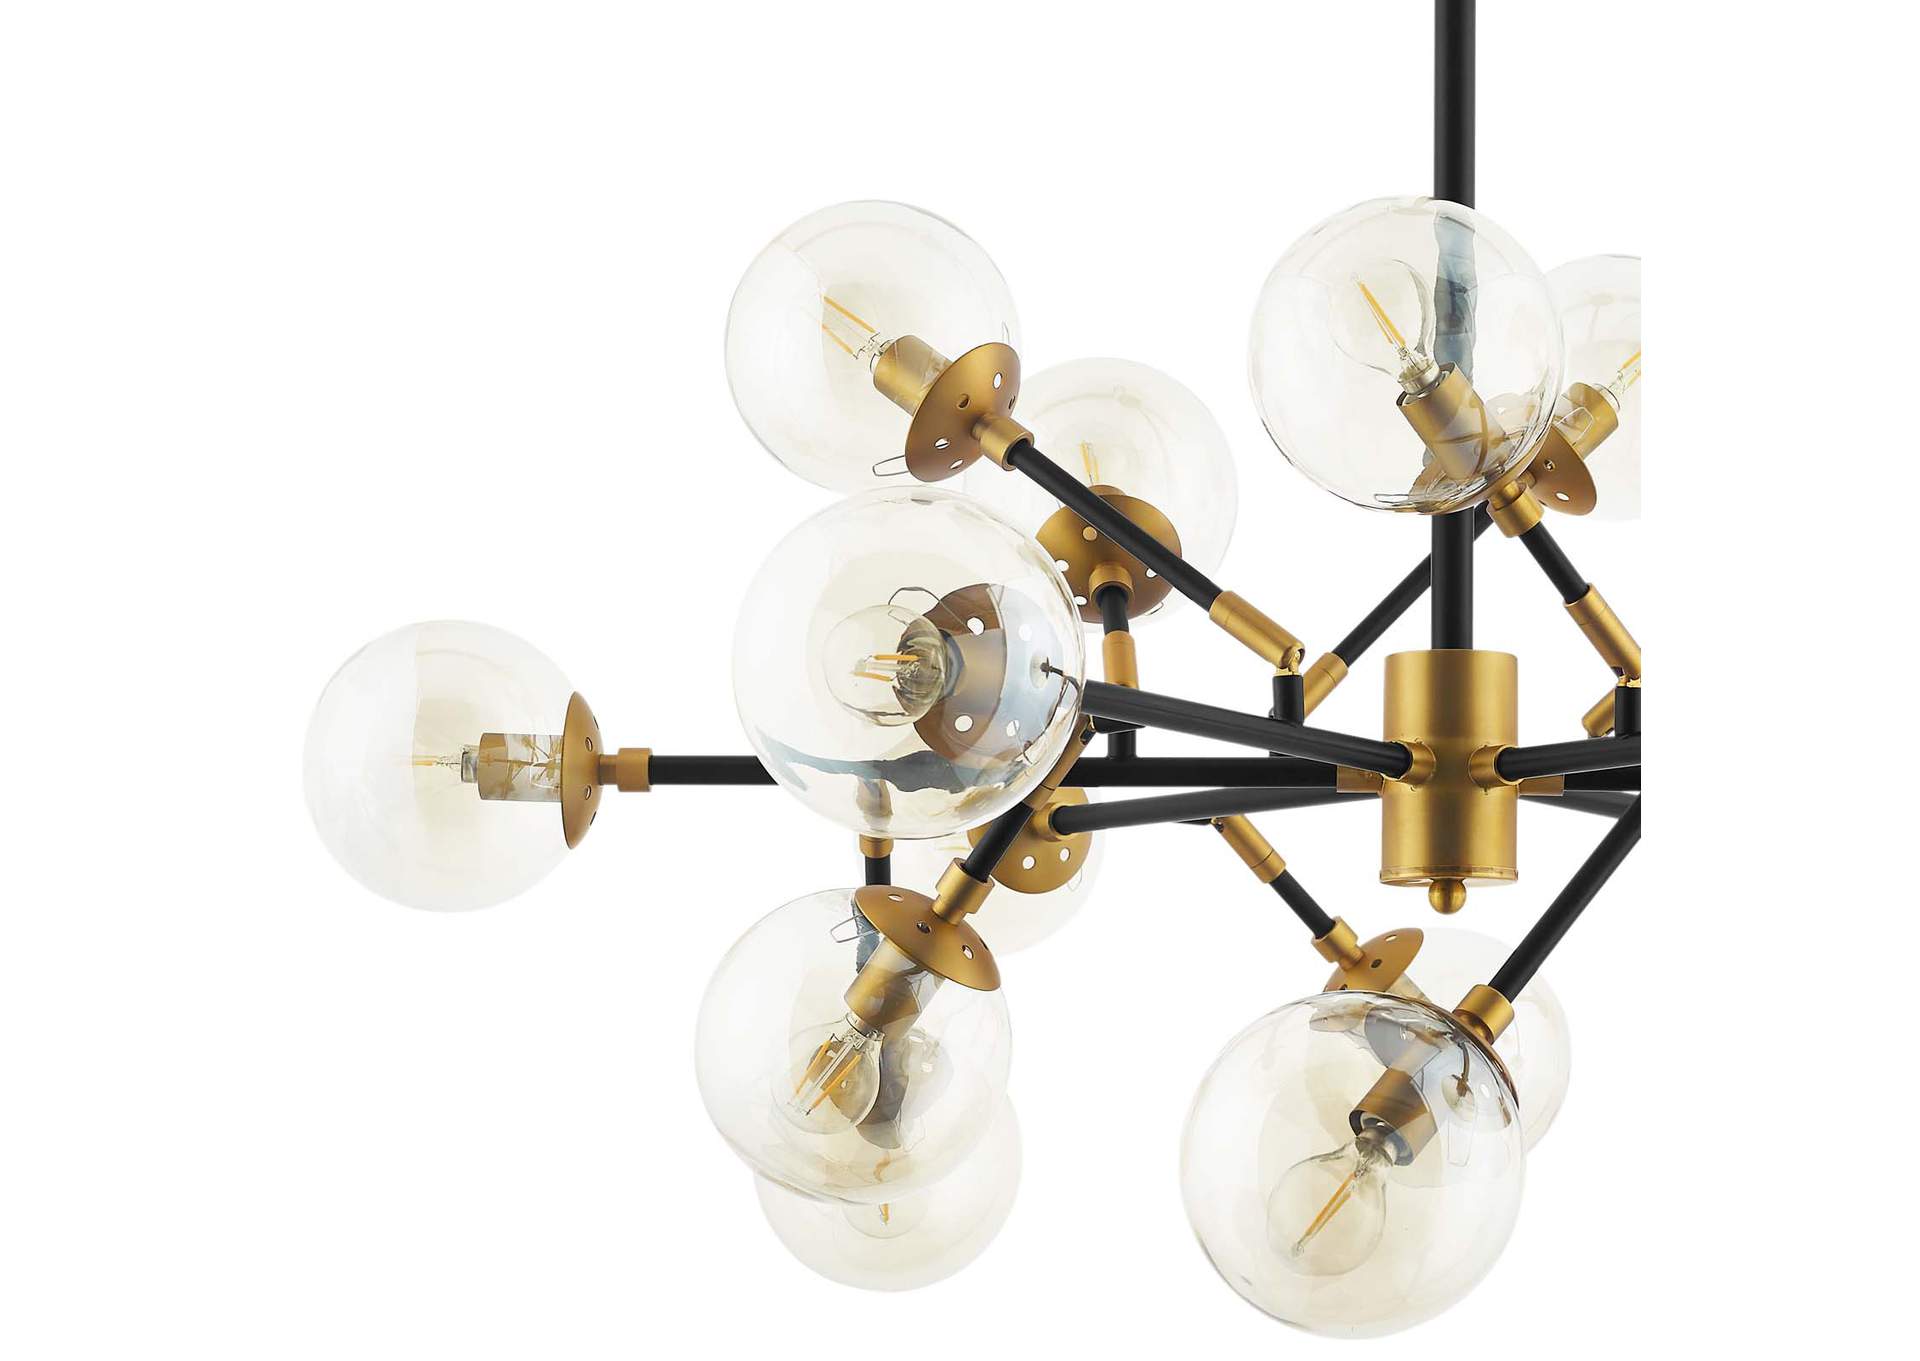 Sparkle Amber Glass And Antique Brass 18 Light Mid-Century Pendant Chandelier,Modway